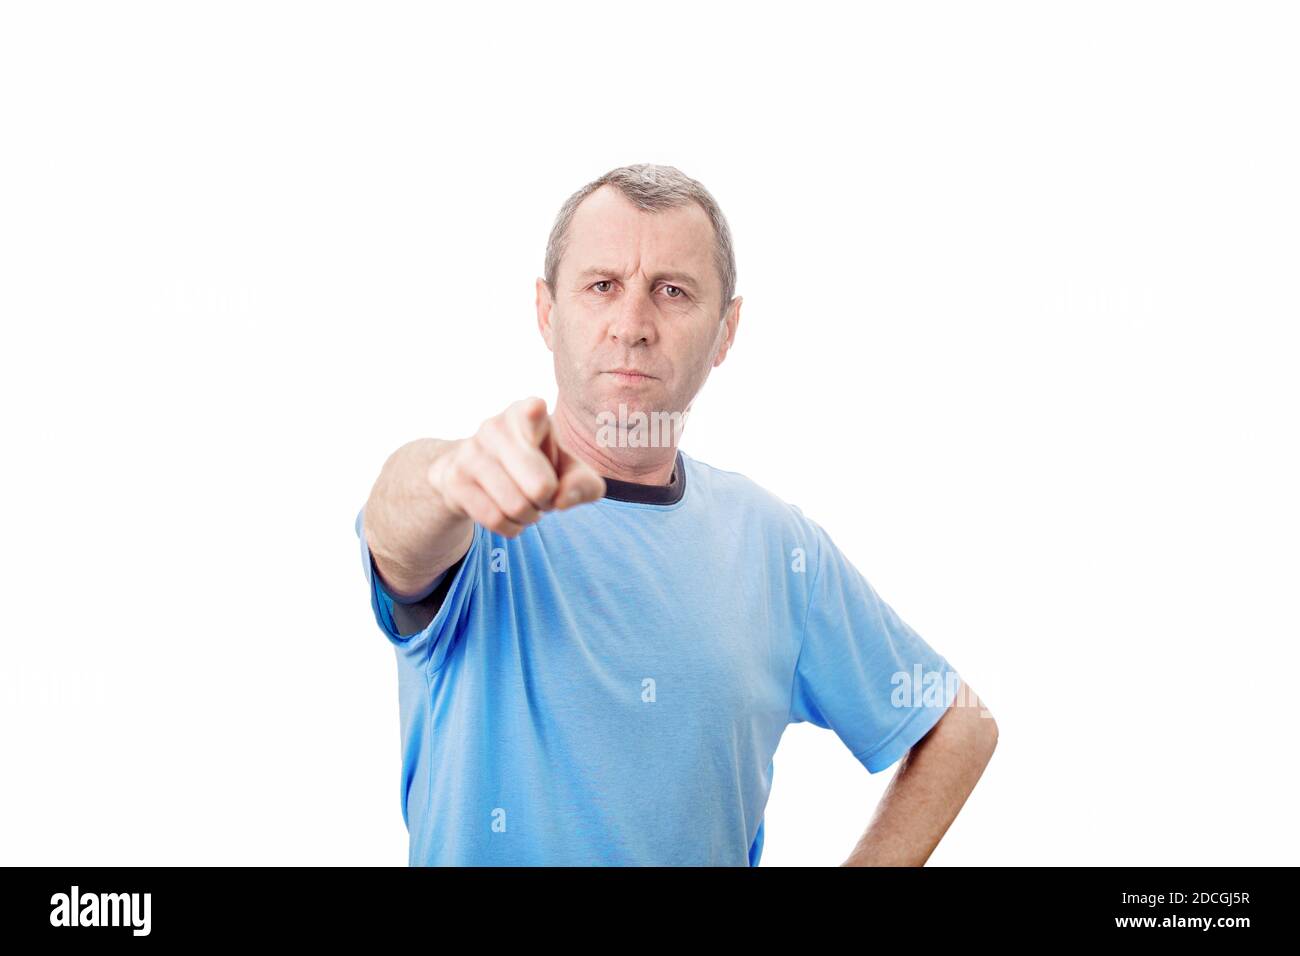 Angry young middle aged man pointing index finger showing to camera, like scolding someone, isolated over white background with copy space. Stock Photo